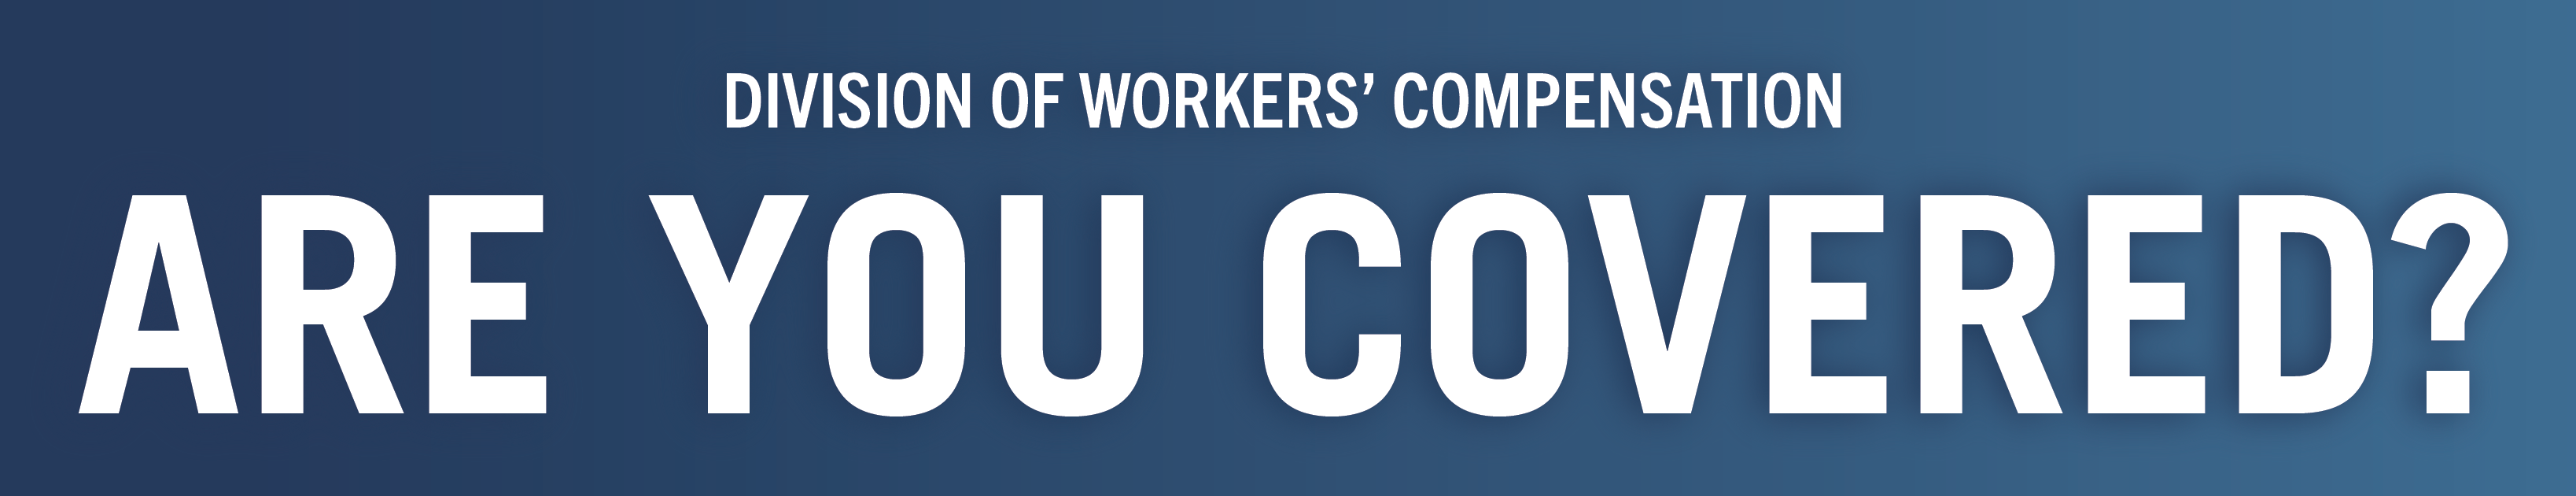 Divison of Workers' Compensation, Are you Covered banner